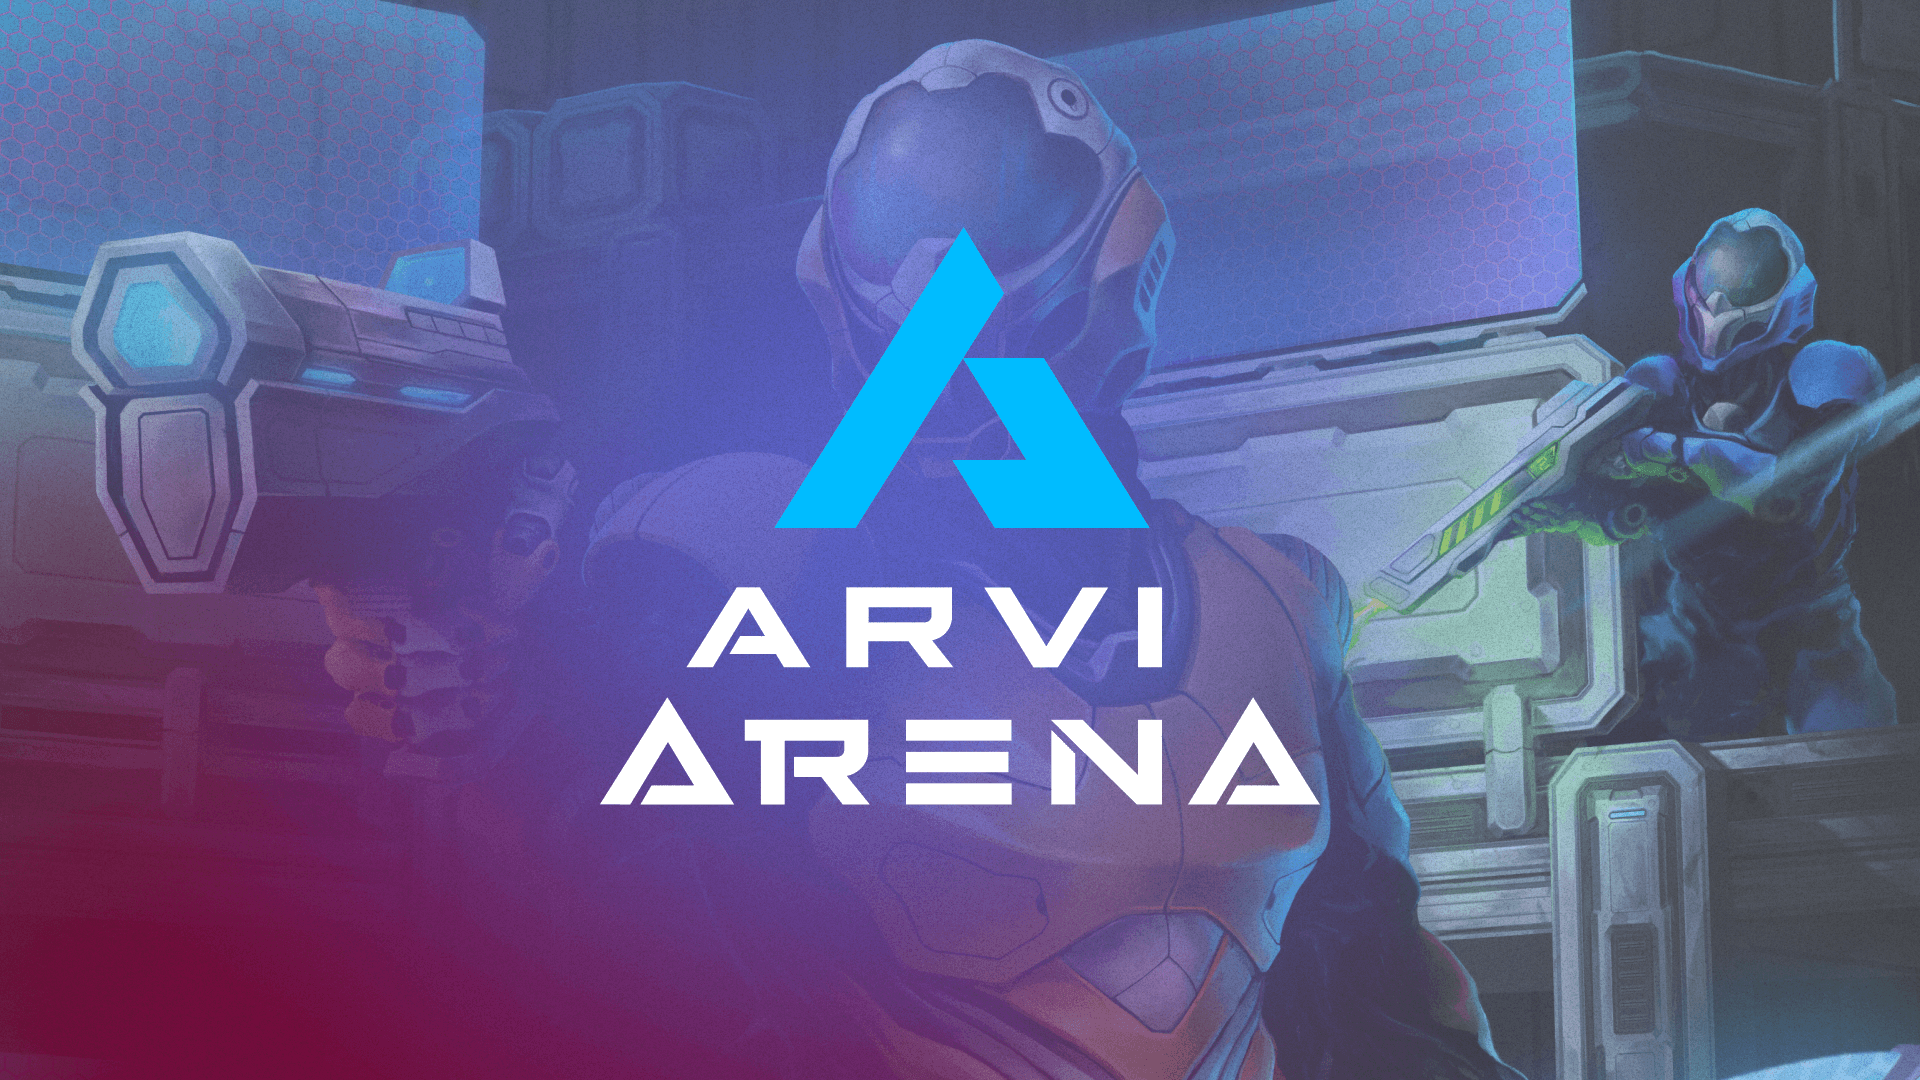 ARVI Arena VR is a multiplayer shooter with a sci-fi feel